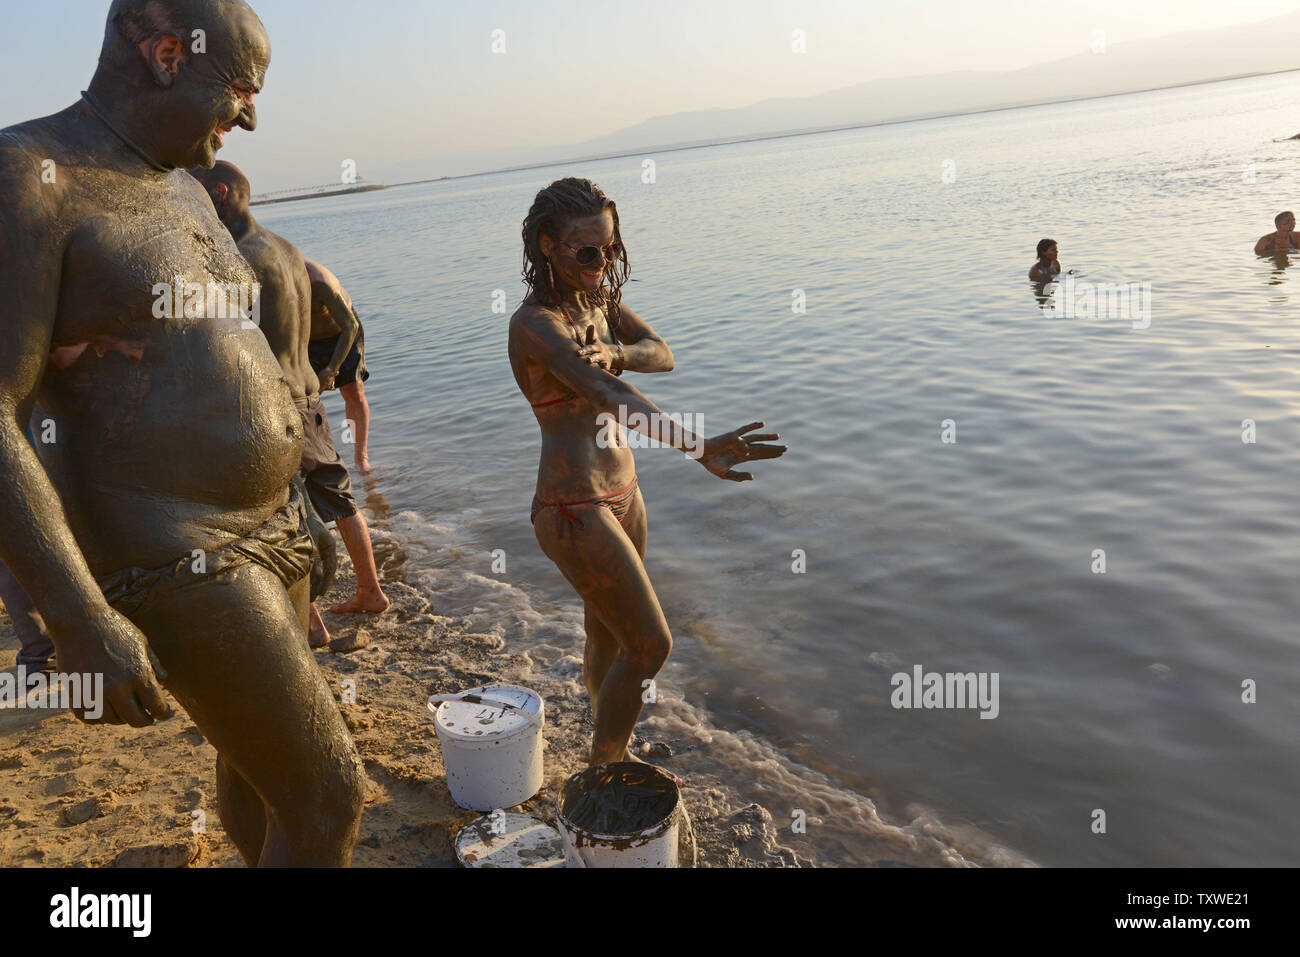 Israeli and international environmental and social activists apply black mud from the Dead Sea during a protest float at dawn against the deterioration of the Dead Sea, in an event organized by U.S. photographer Spencer Tunick, not seen, at Ein Bokek, Israel, September 14, 2012. UPI/Debbie Hill Stock Photo